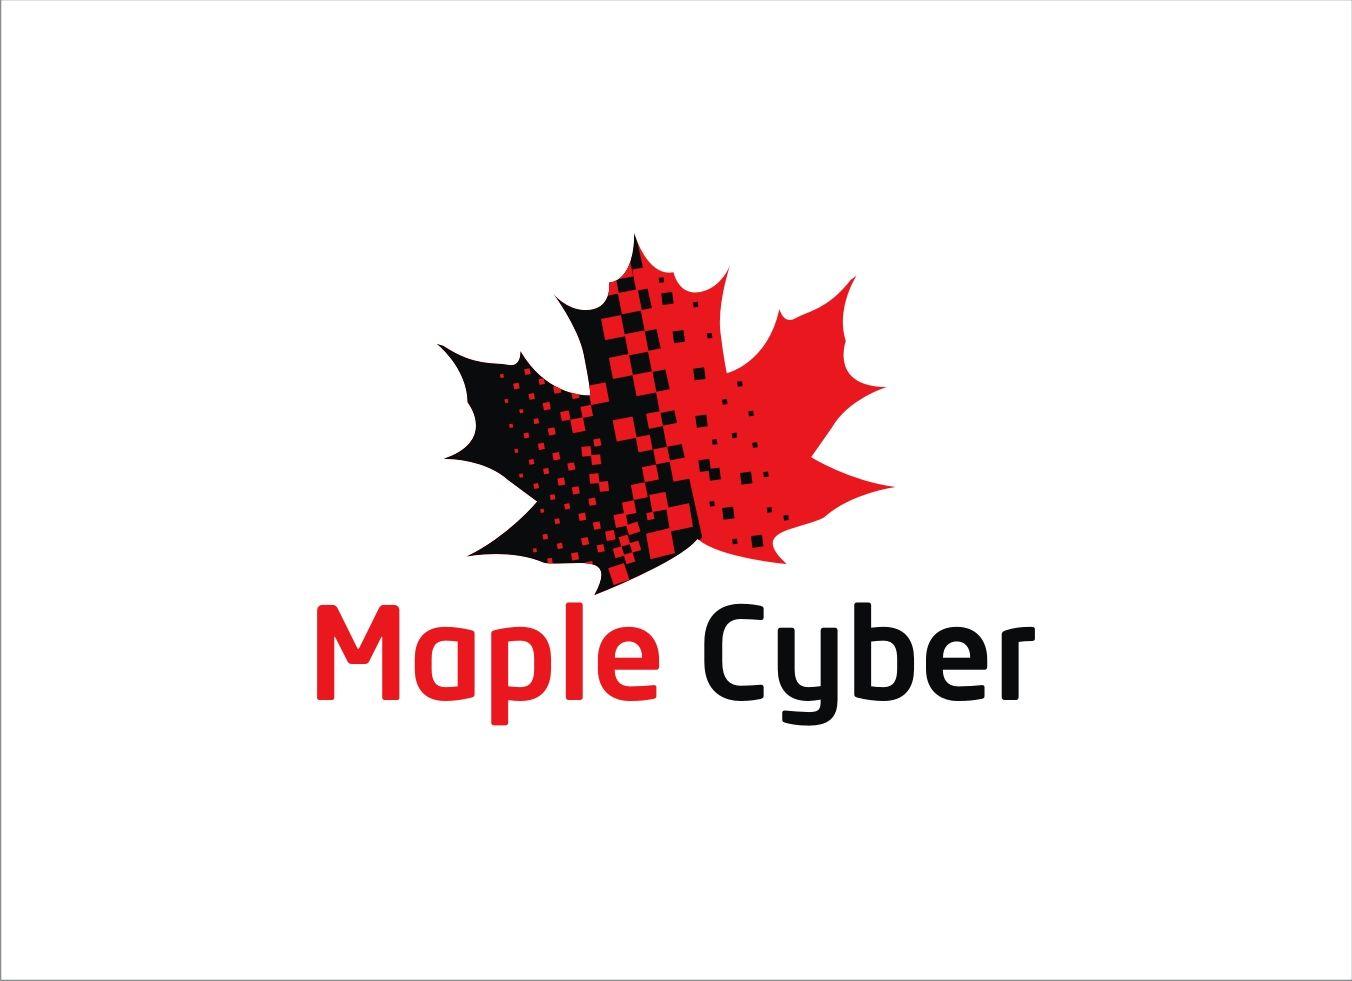 Red Maple Leaf Company Logo - Elegant, Traditional, It Company Logo Design for Maple Cyber by hih7 ...